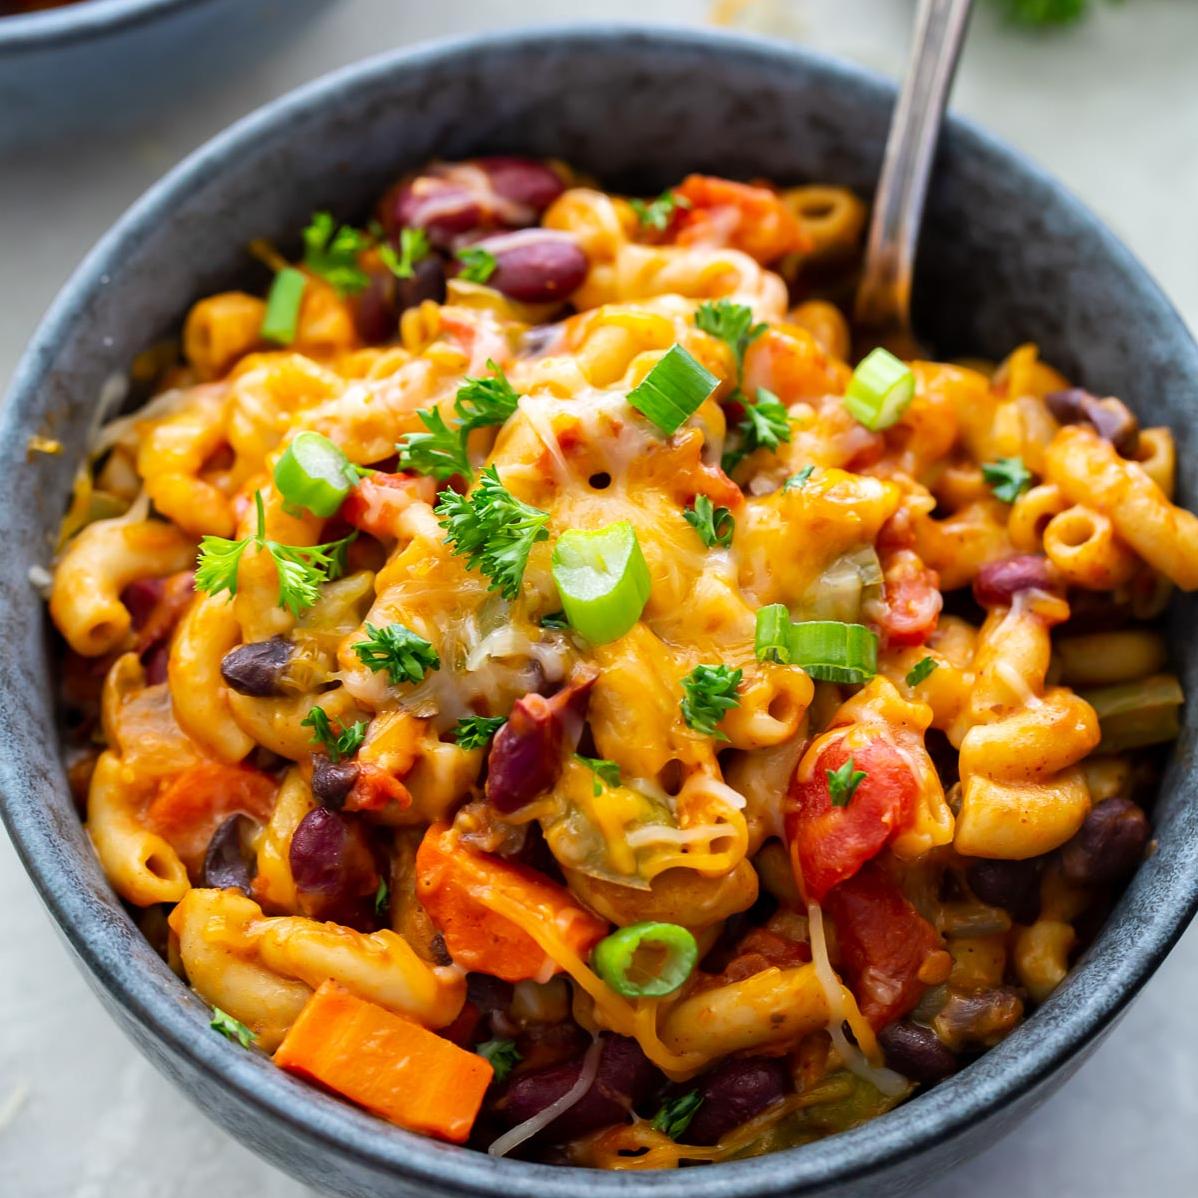  A hearty and satisfying bowl of vegetarian chili cheese mac!